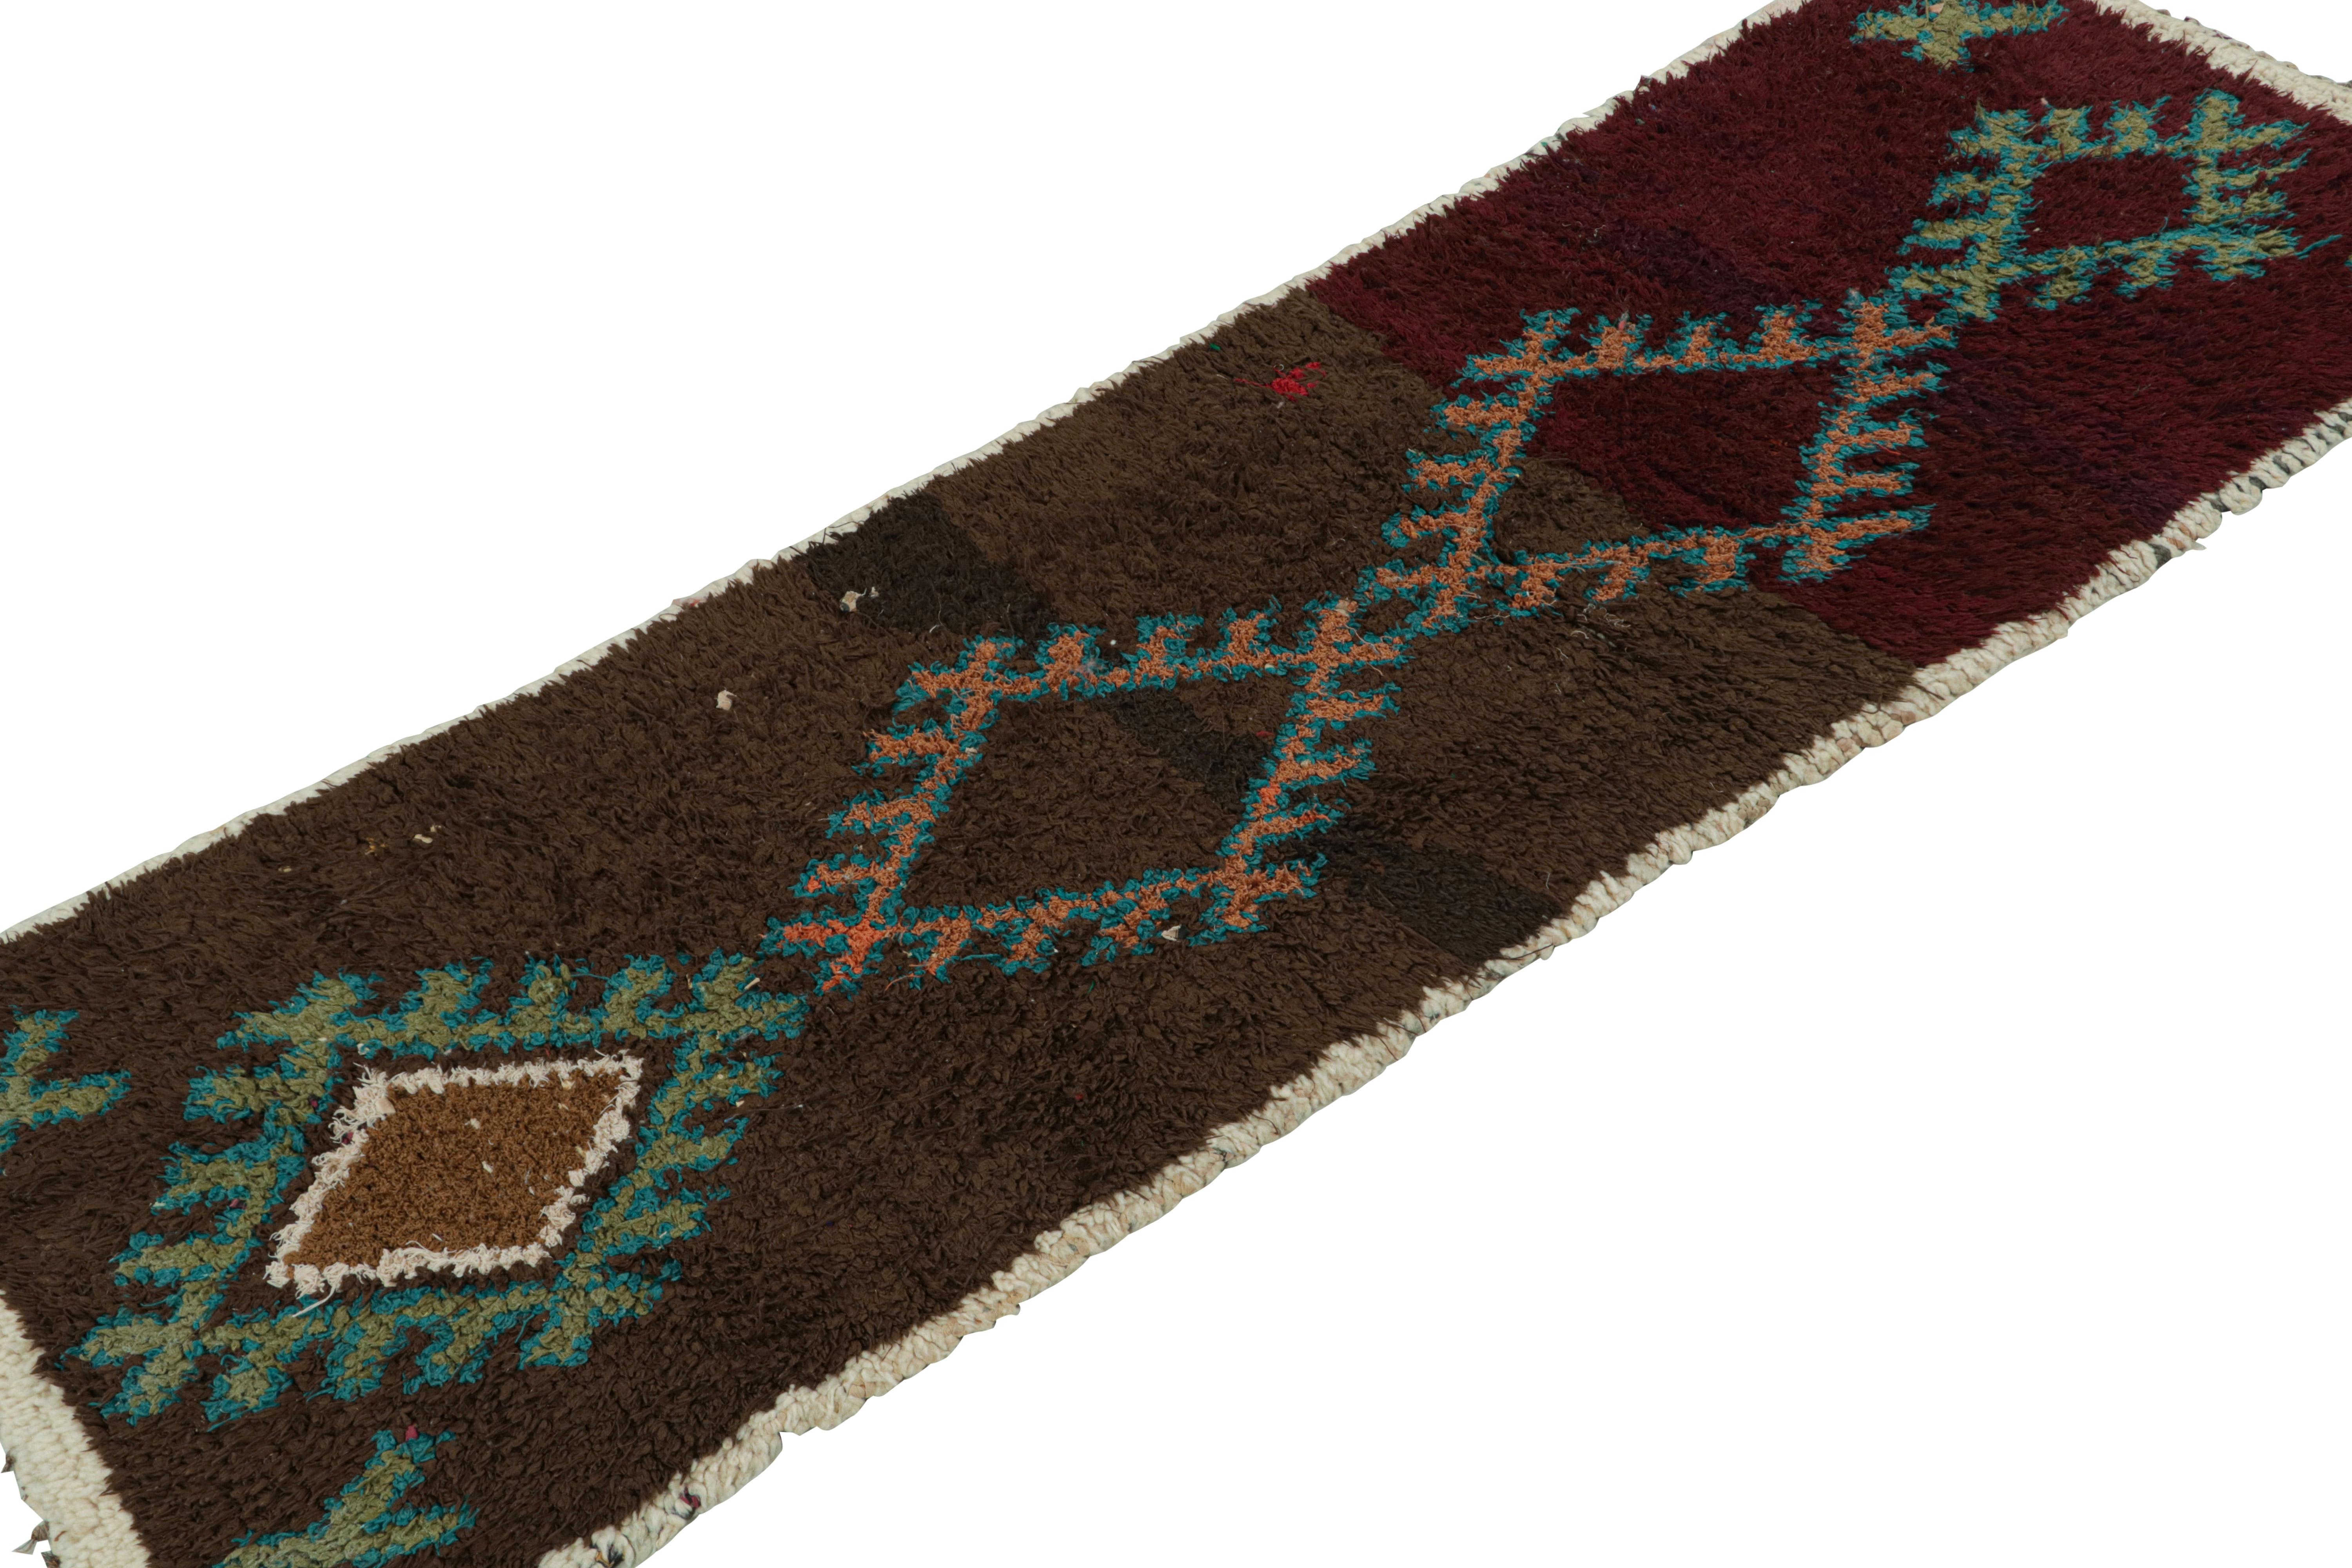 Hand-knotted in wool and cotton, circa 1950-1960, this 2x6 vintage Moroccan runner rug is believed to hail from the Azilal tribe. 

On the Design: 

This piece enjoys a lush high pile with polychromatic primitivist Berber geometric diamond medallion